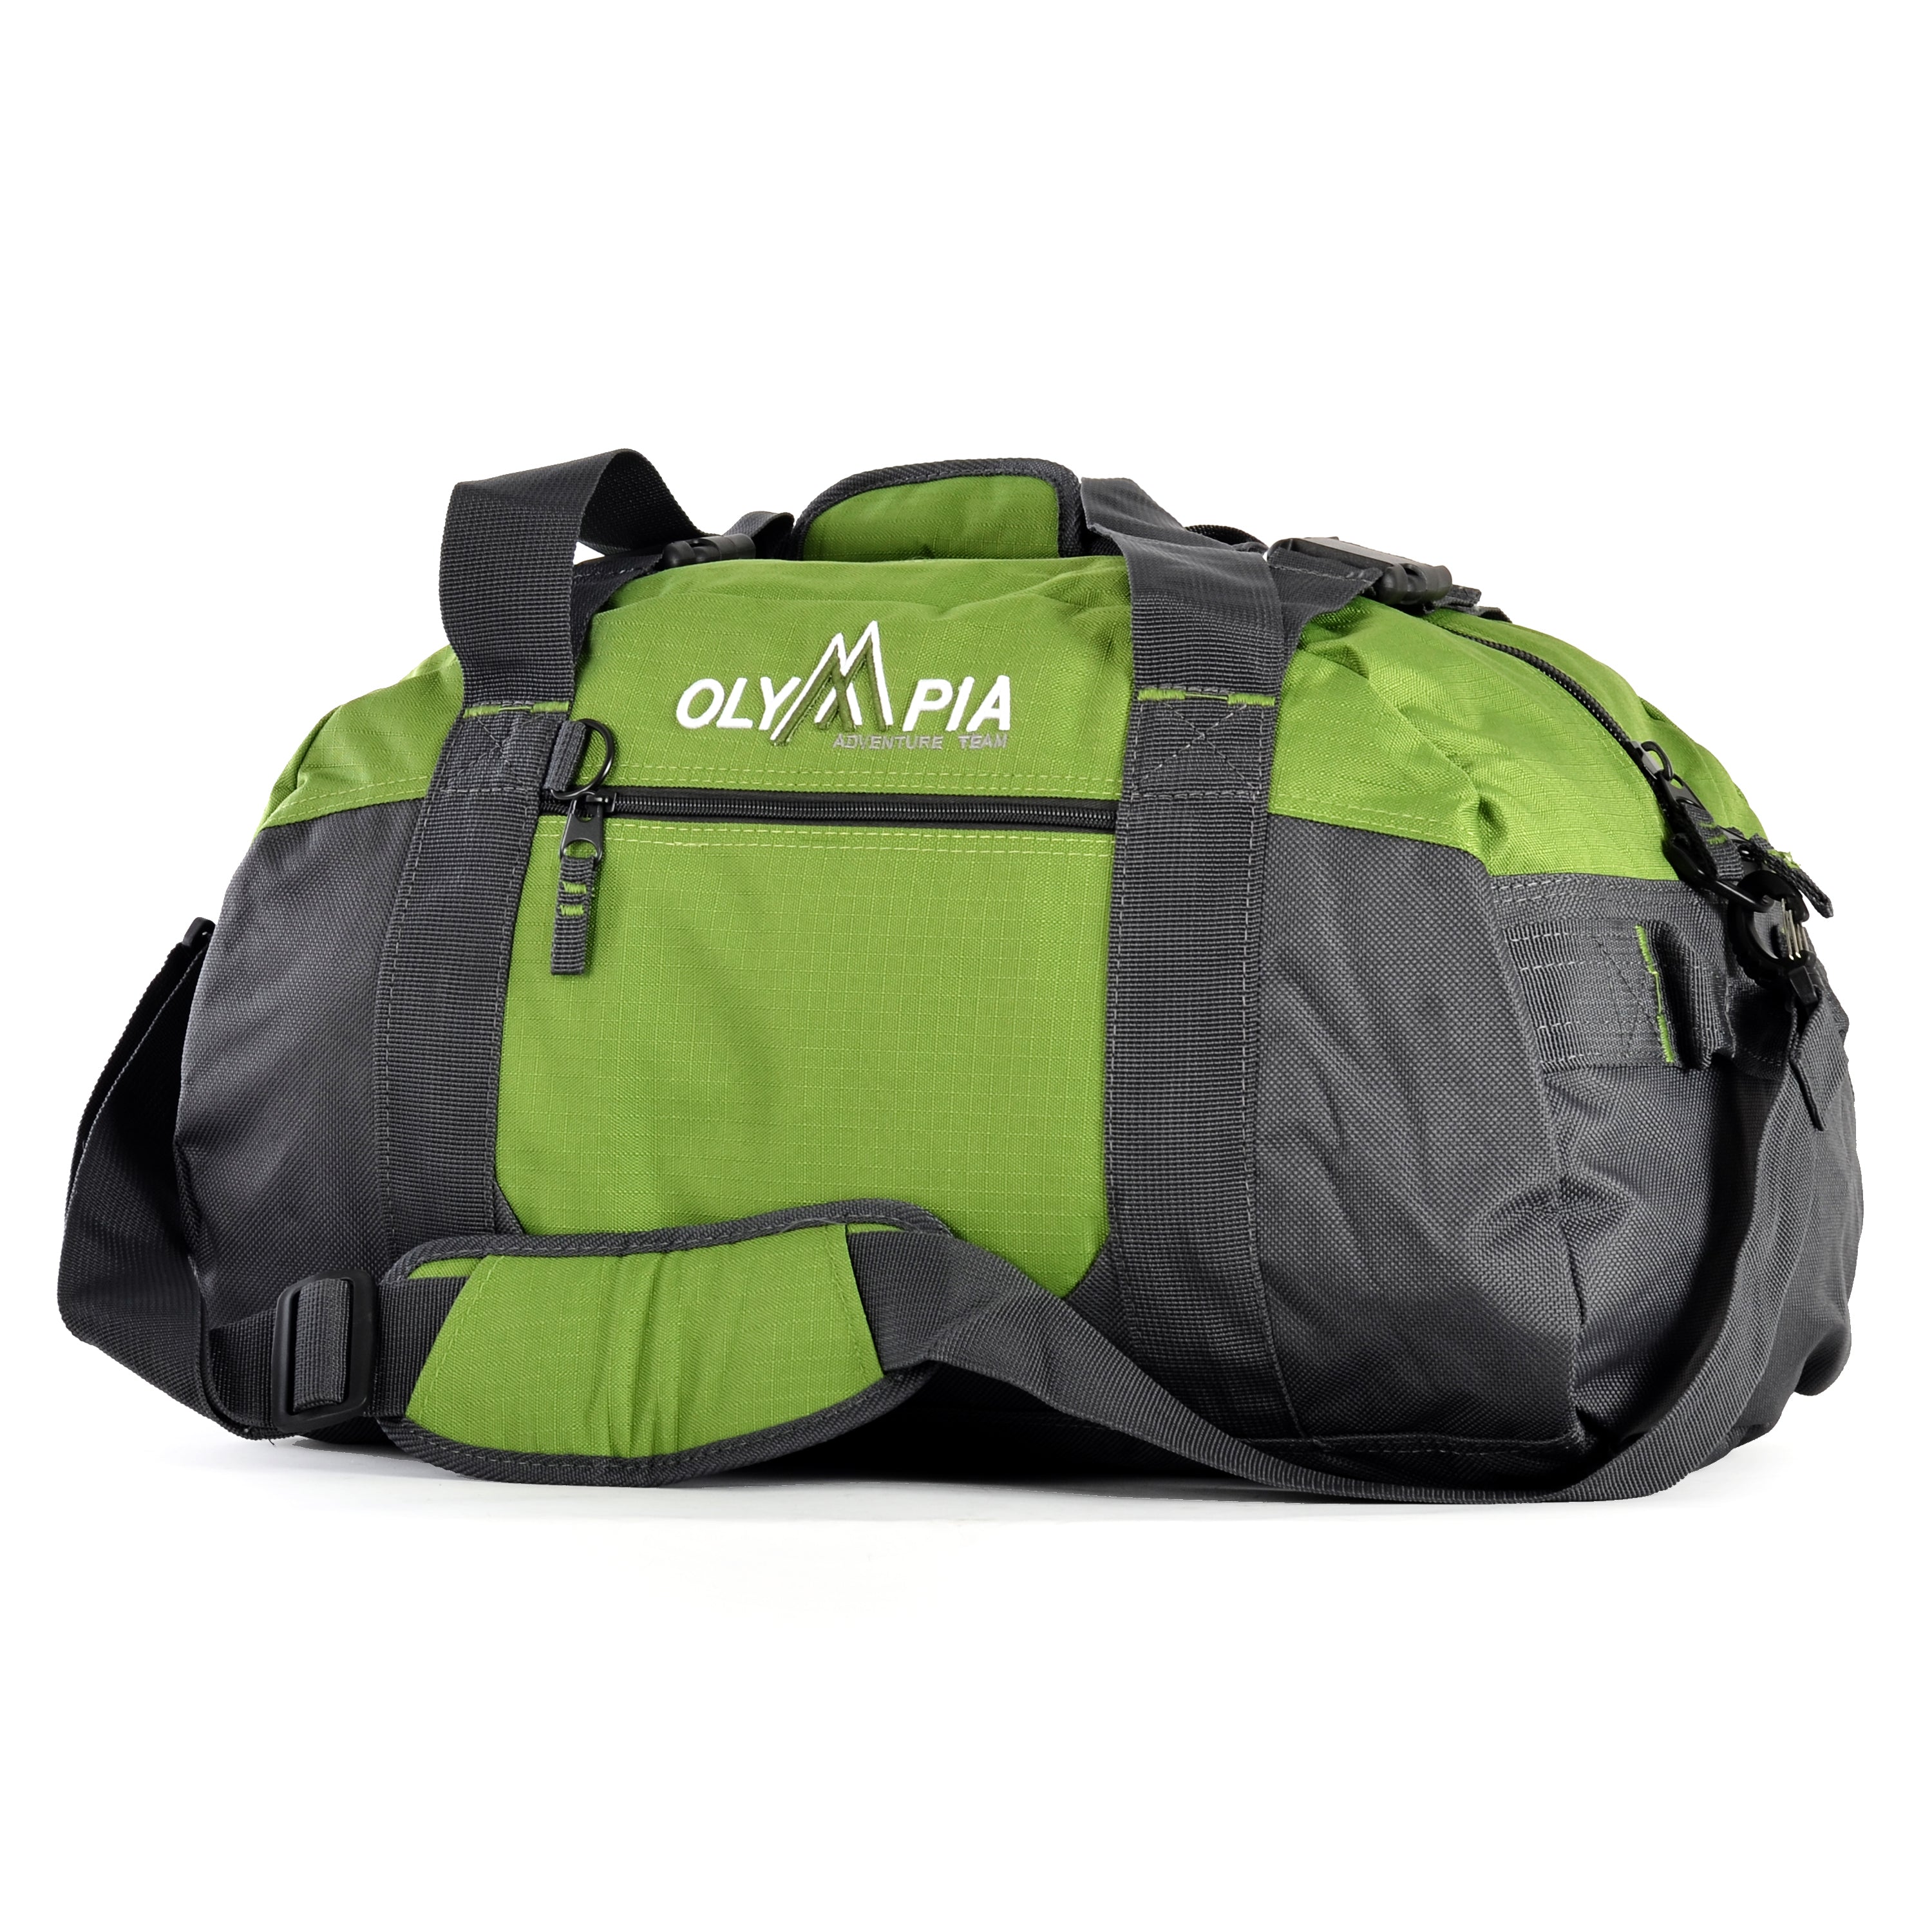 21" Durable Sports Duffels with a Organizing Pouch